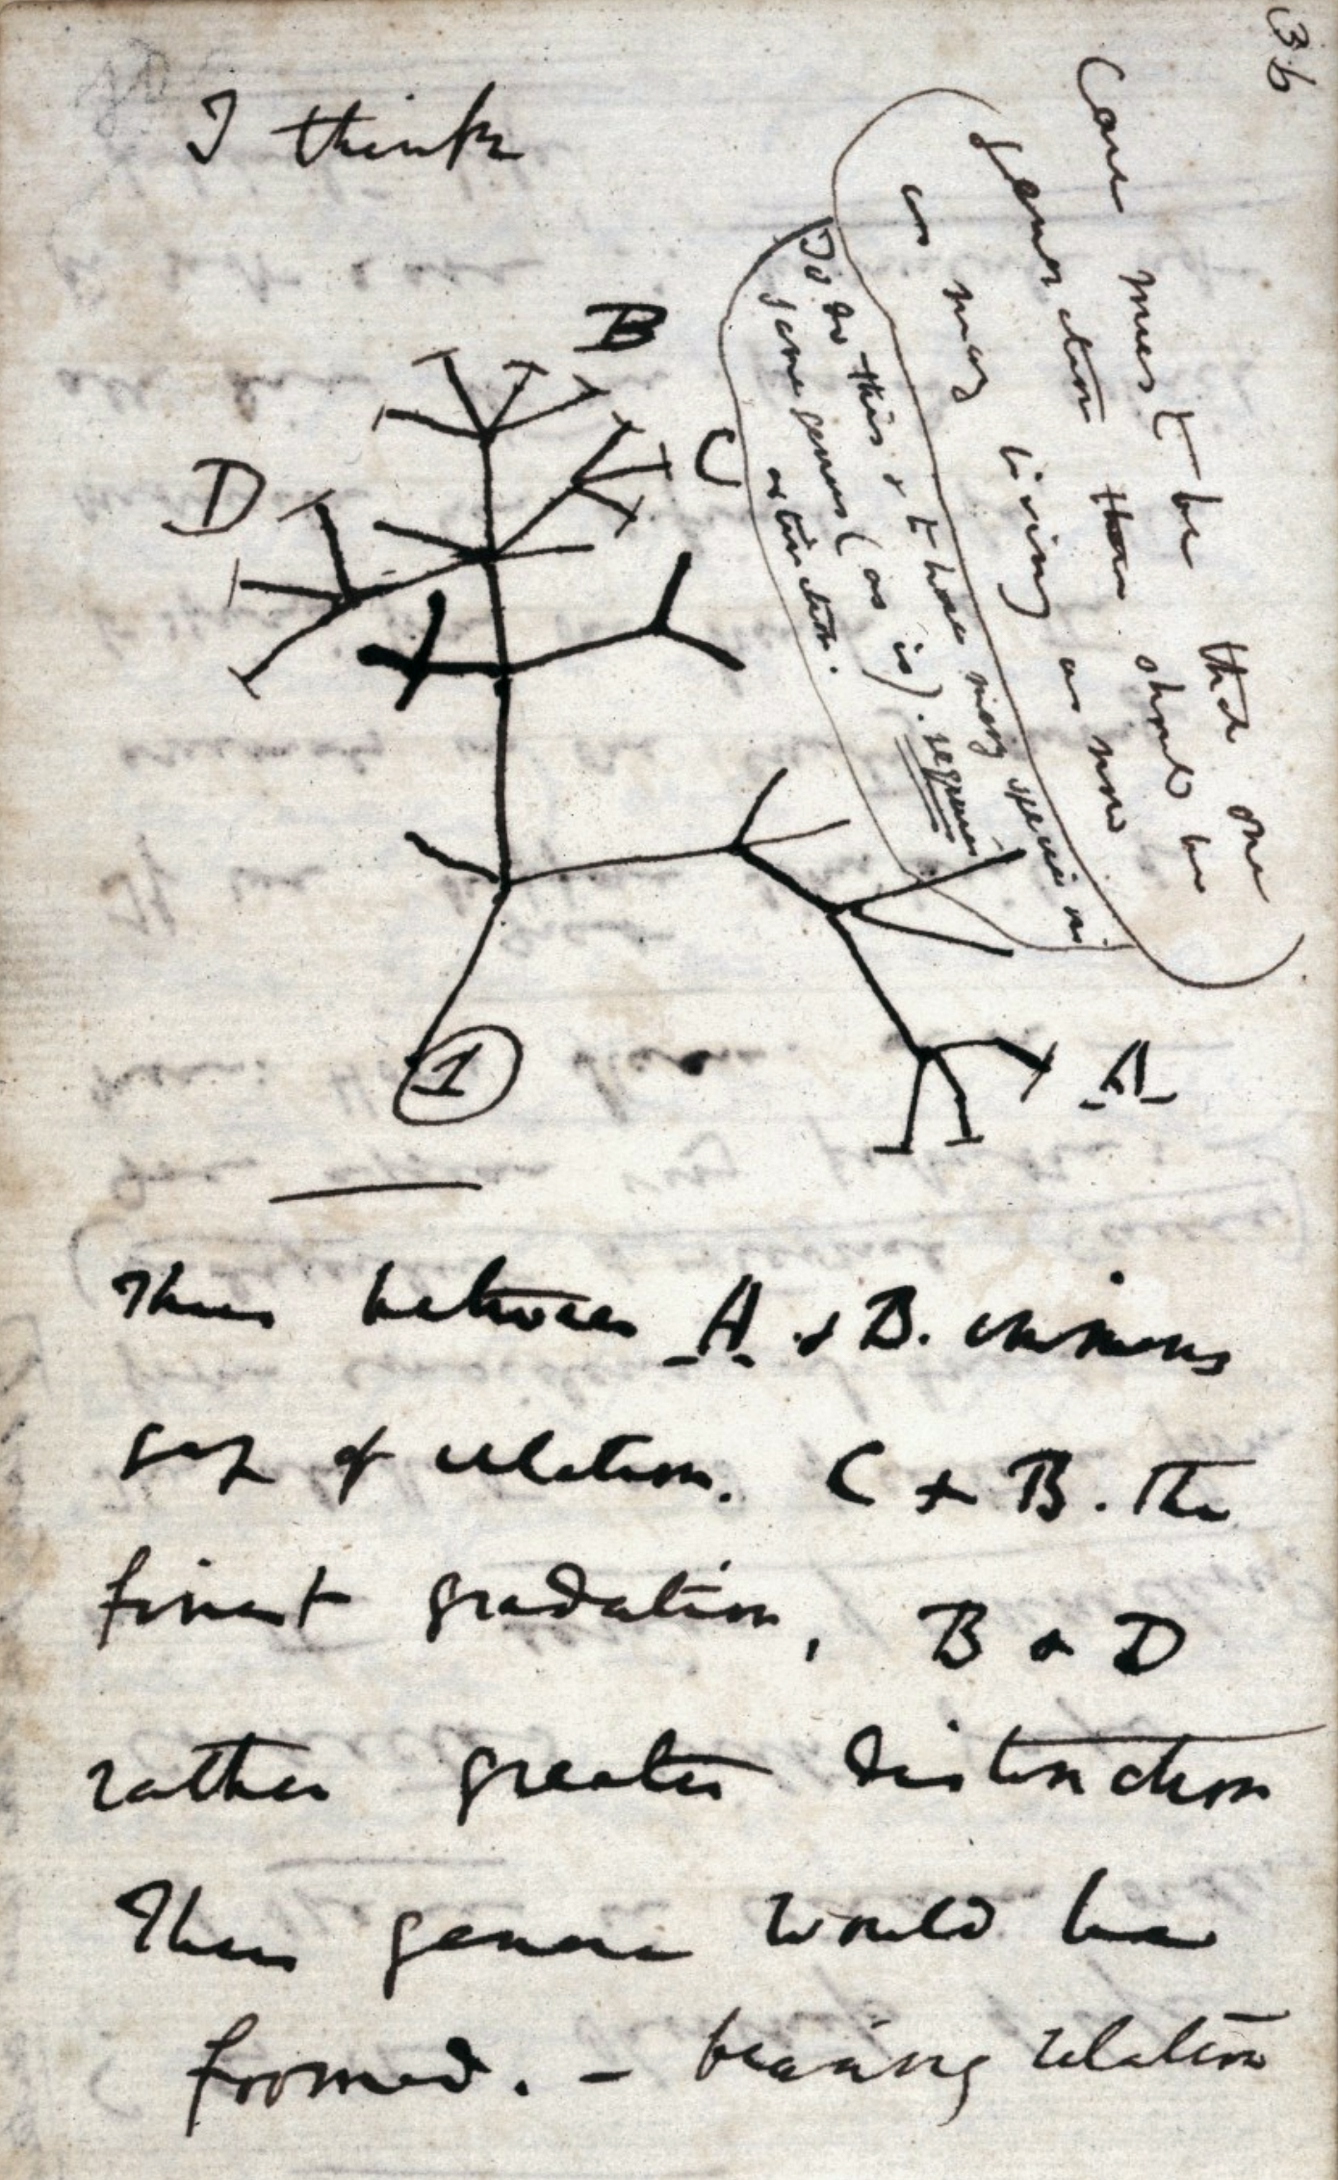 Black ink on a white page showing a very rough tree illustration with letters A to D labelling "branches". Darwin's handwritten notes are underneath. 